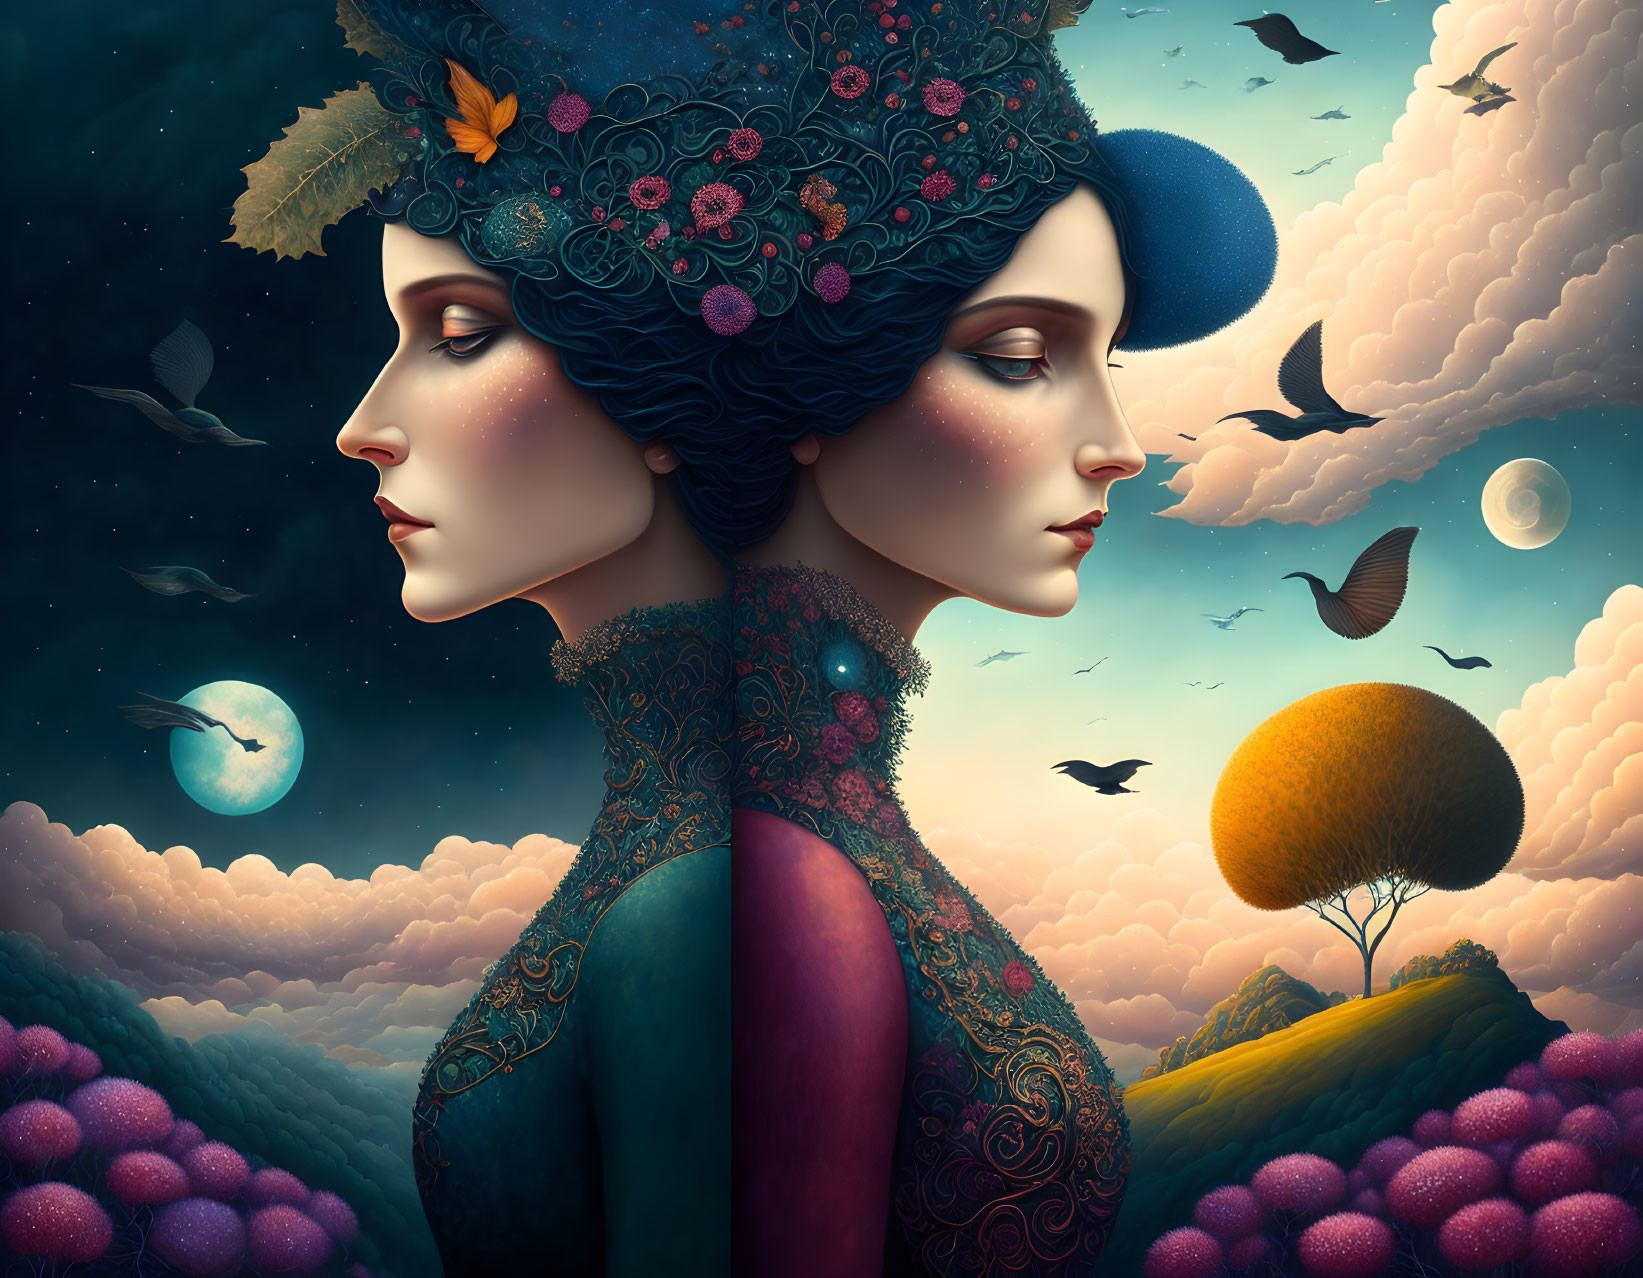 Surreal illustration of blended women's profiles with floral motifs in dreamy landscape